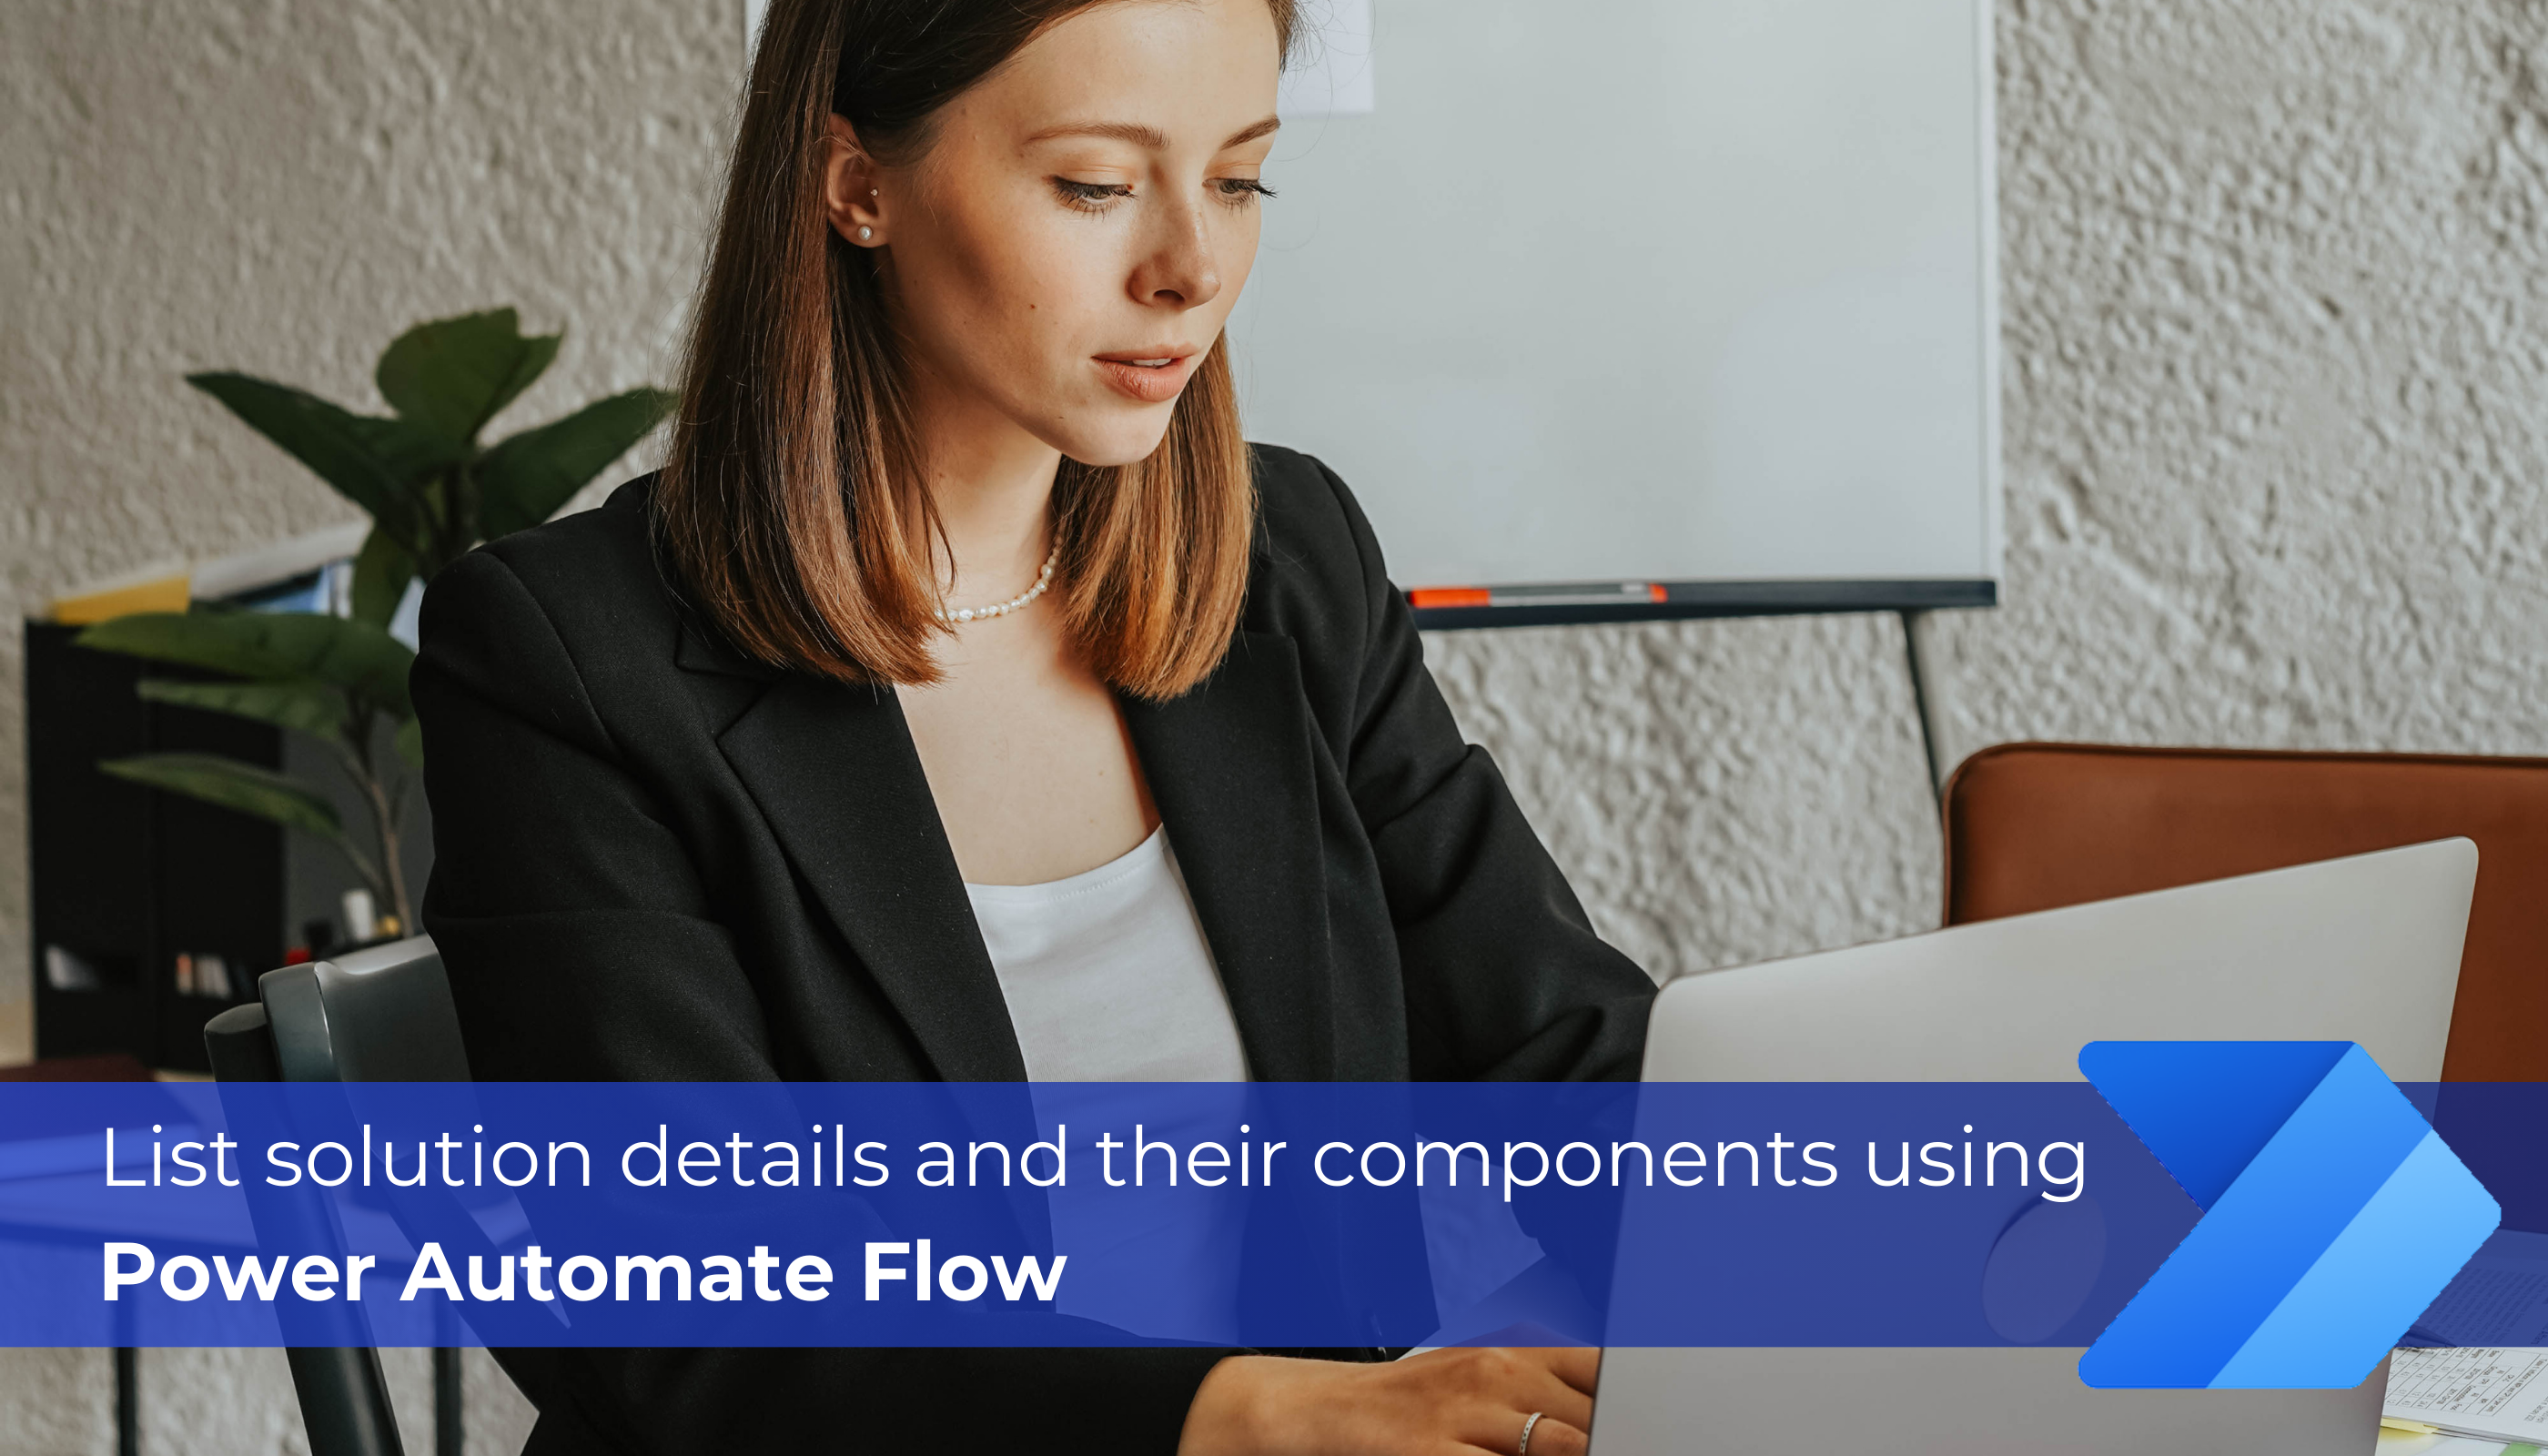 List solution details and their components using Power Automate Flow